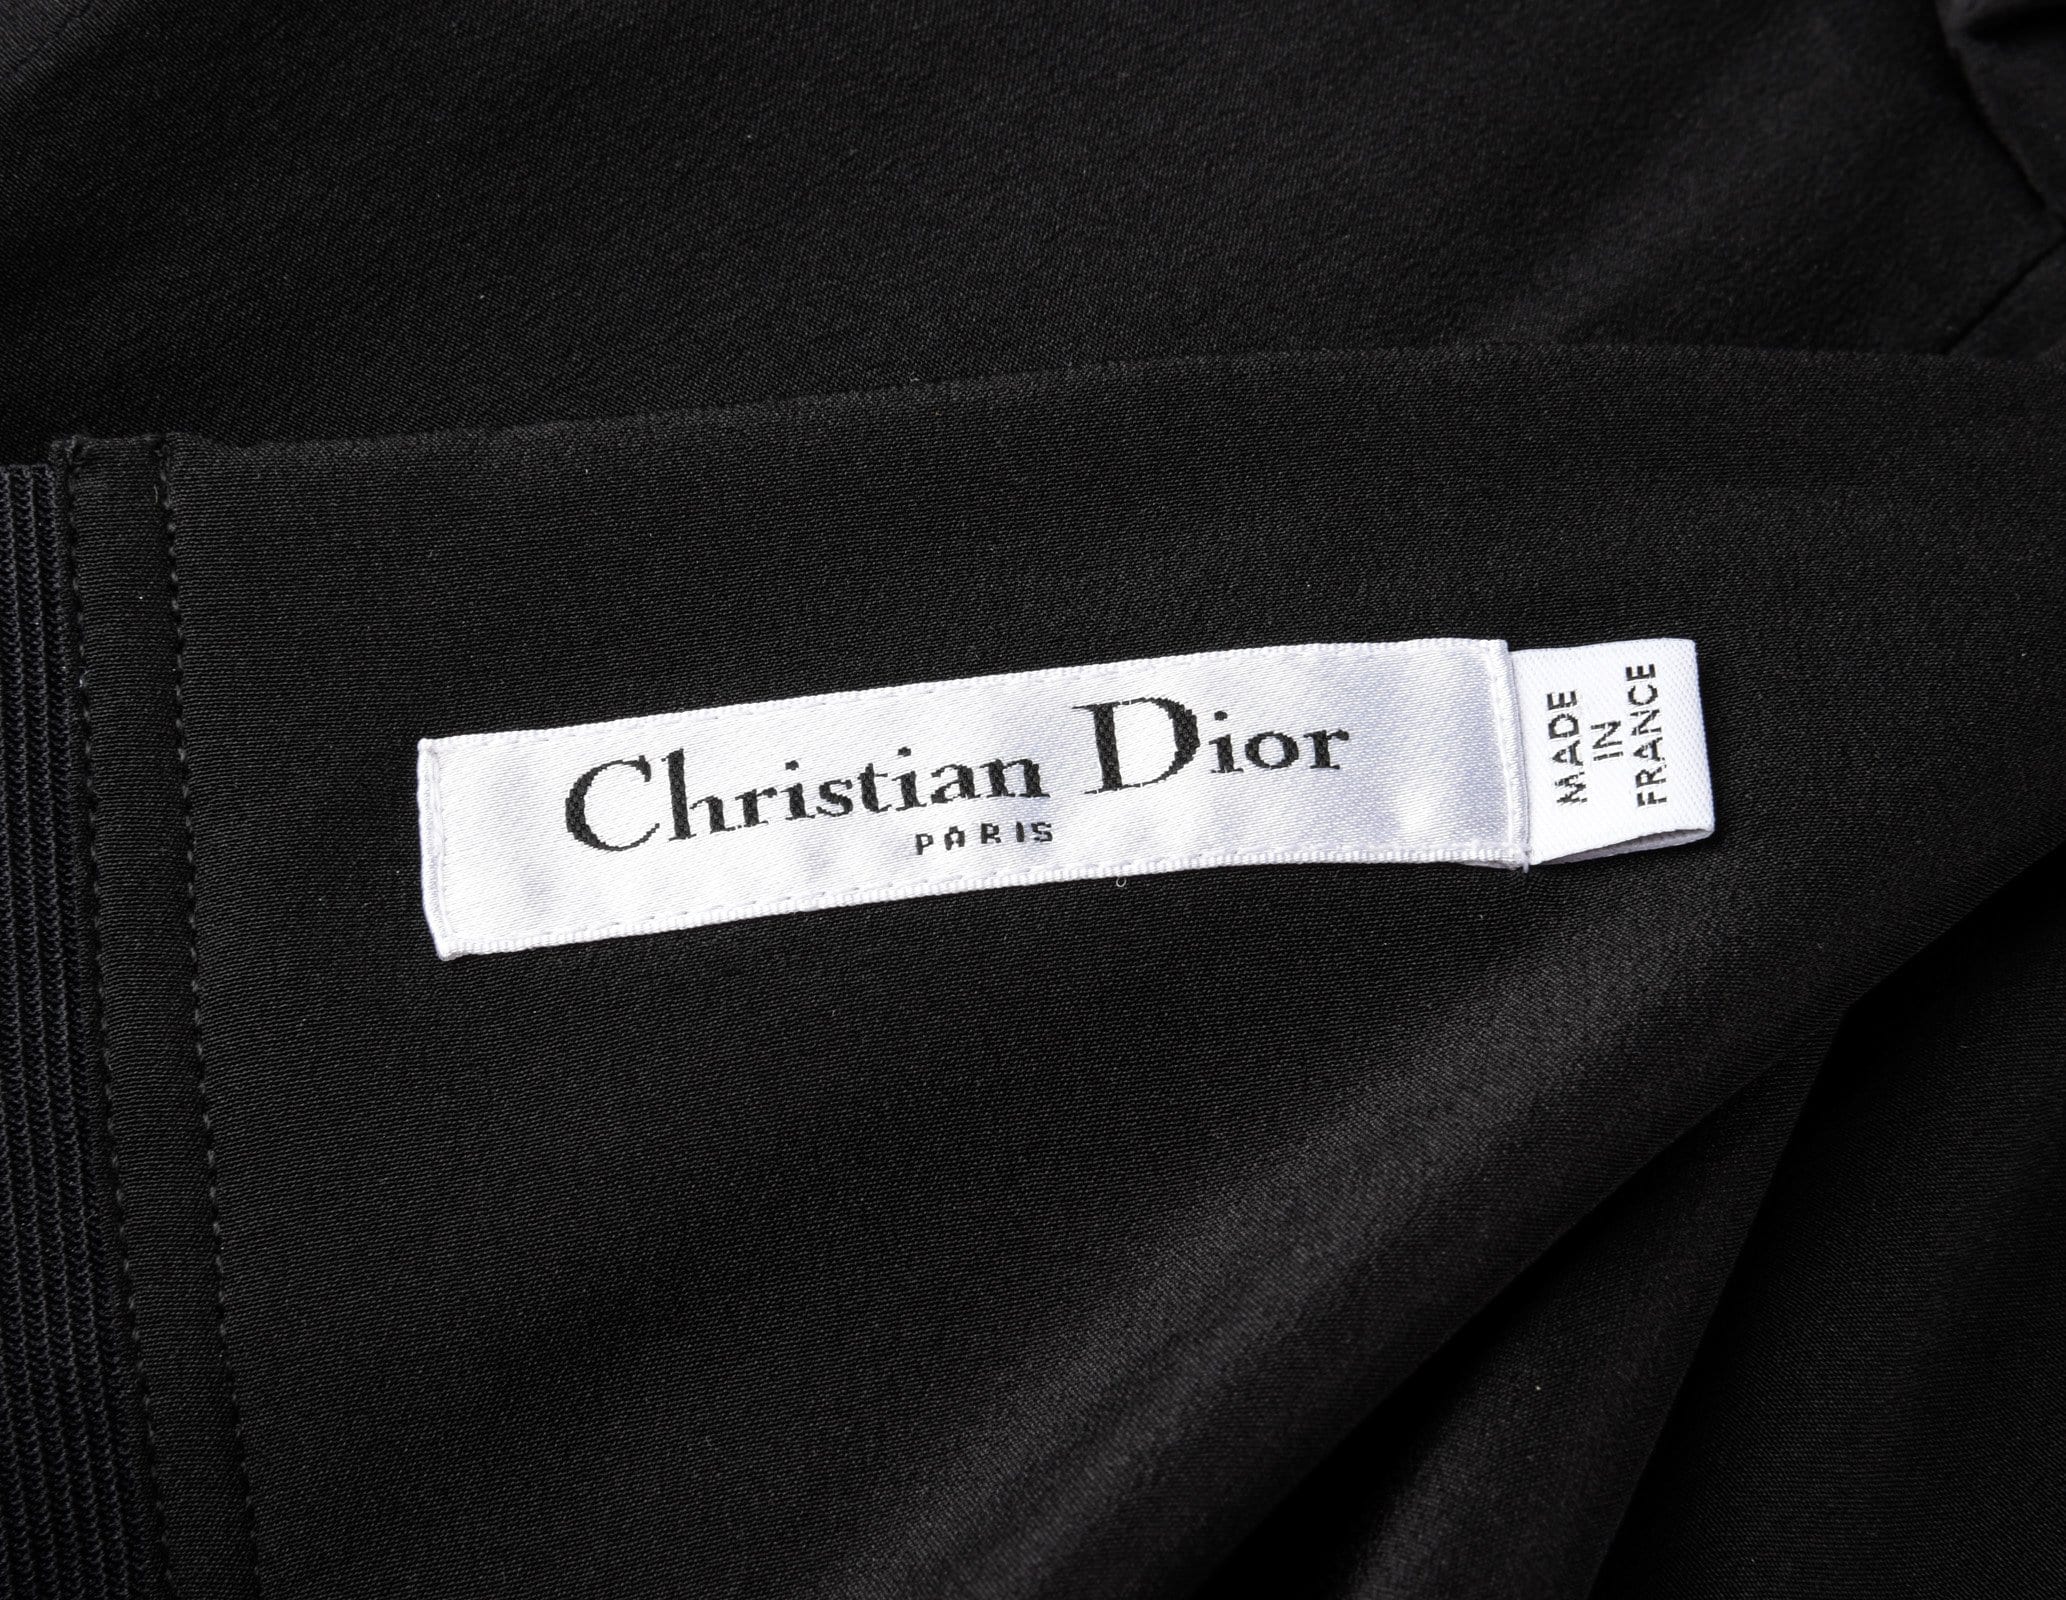 Christian Dior Dress Babydoll Style Elbow Length Sleeve Black Fits 6 to 8 - mightychic